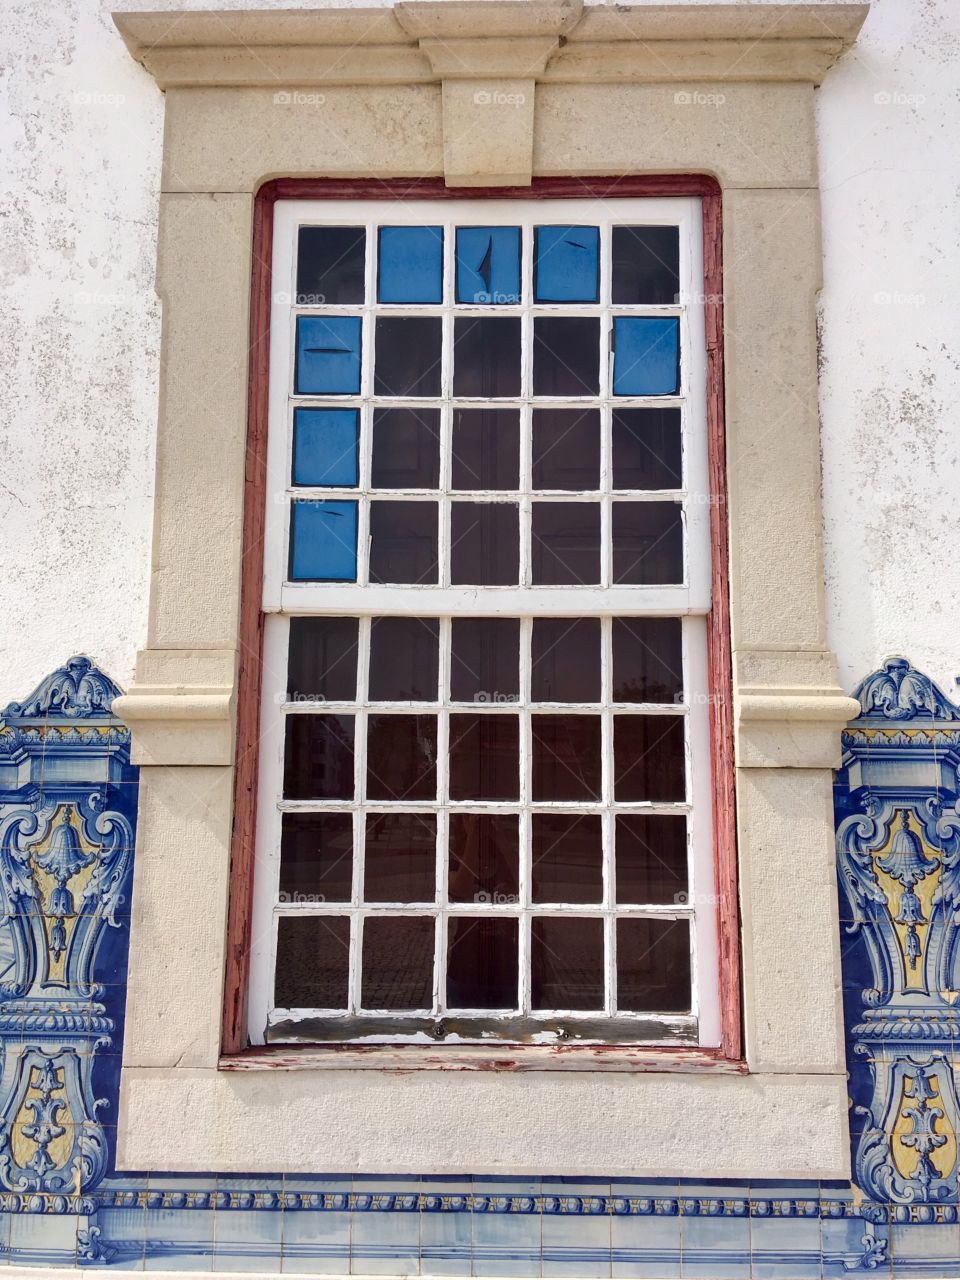 Centenary Window with tiles